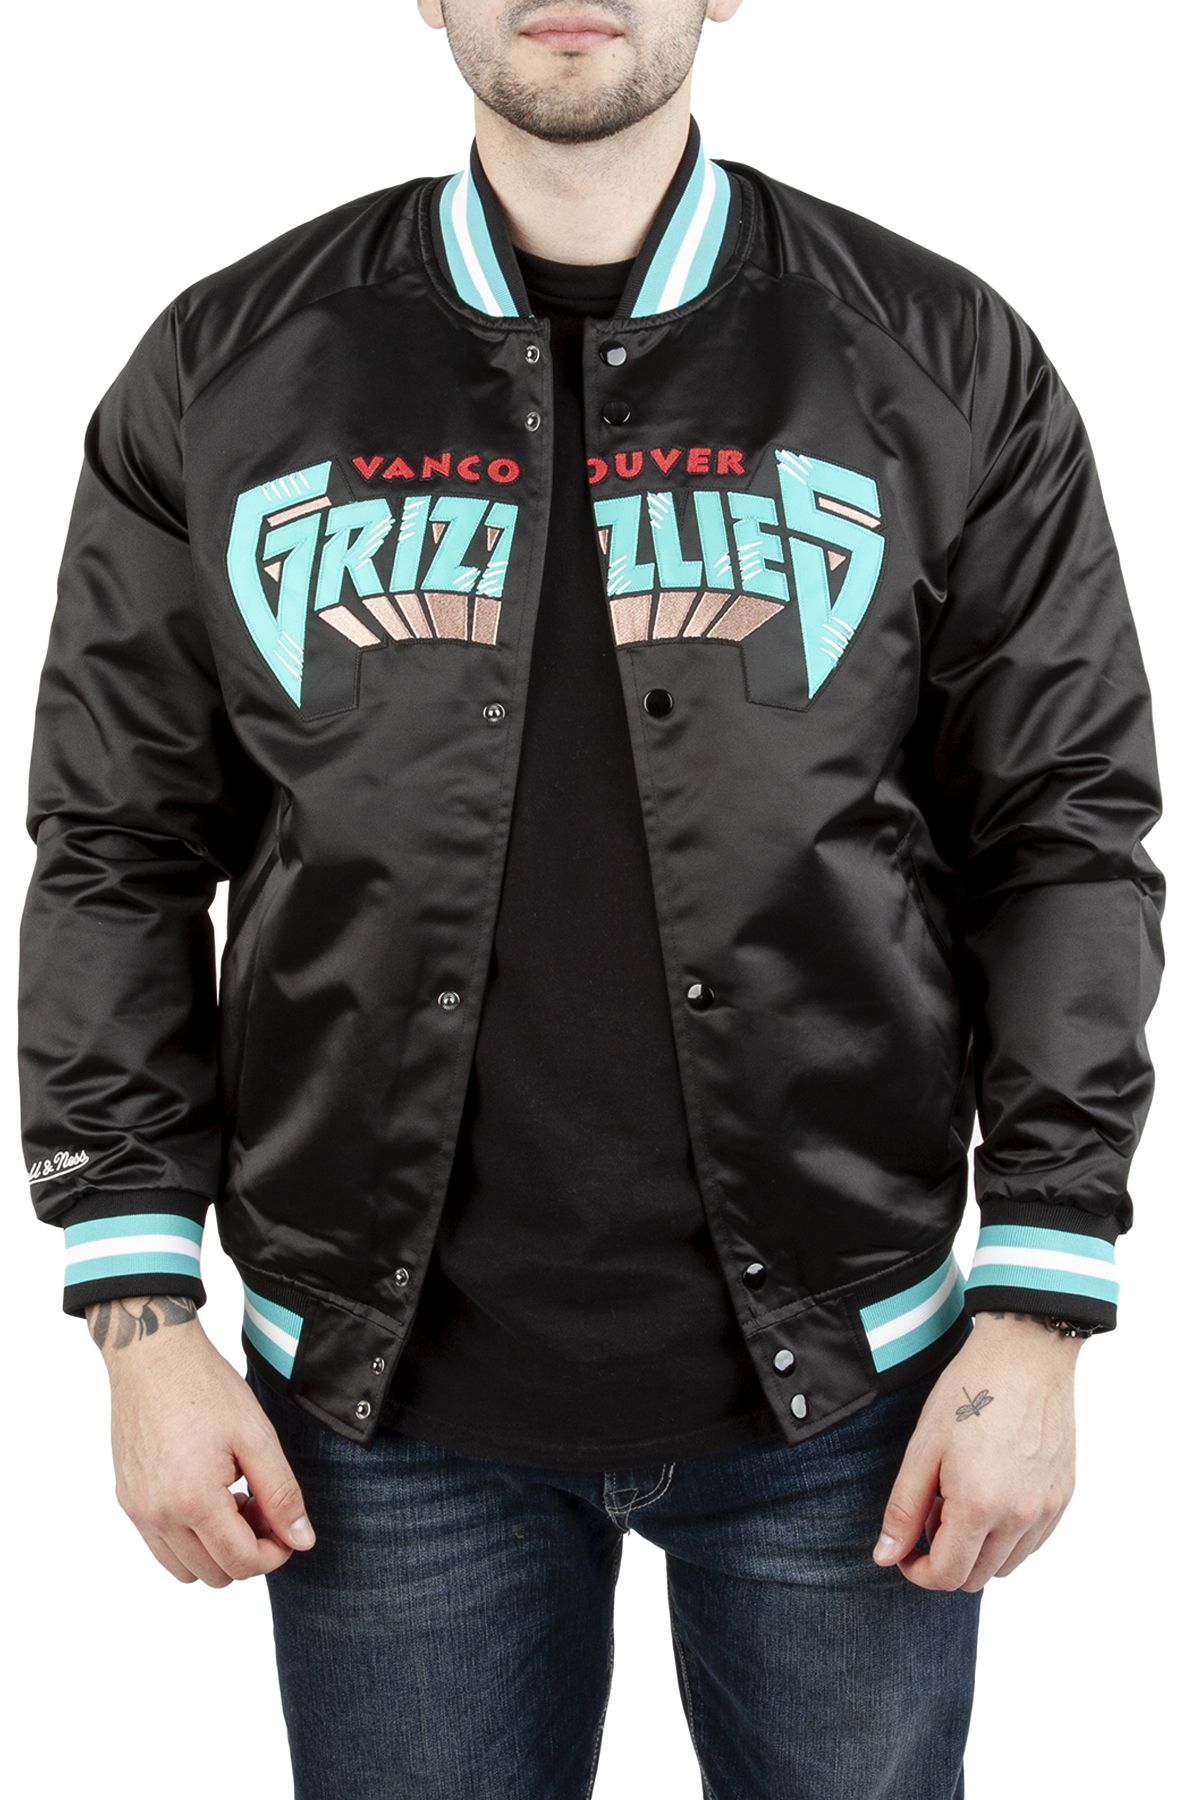 Maker of Jacket Fashion Jackets Navy and Light Blue Memphis Grizzlies Satin